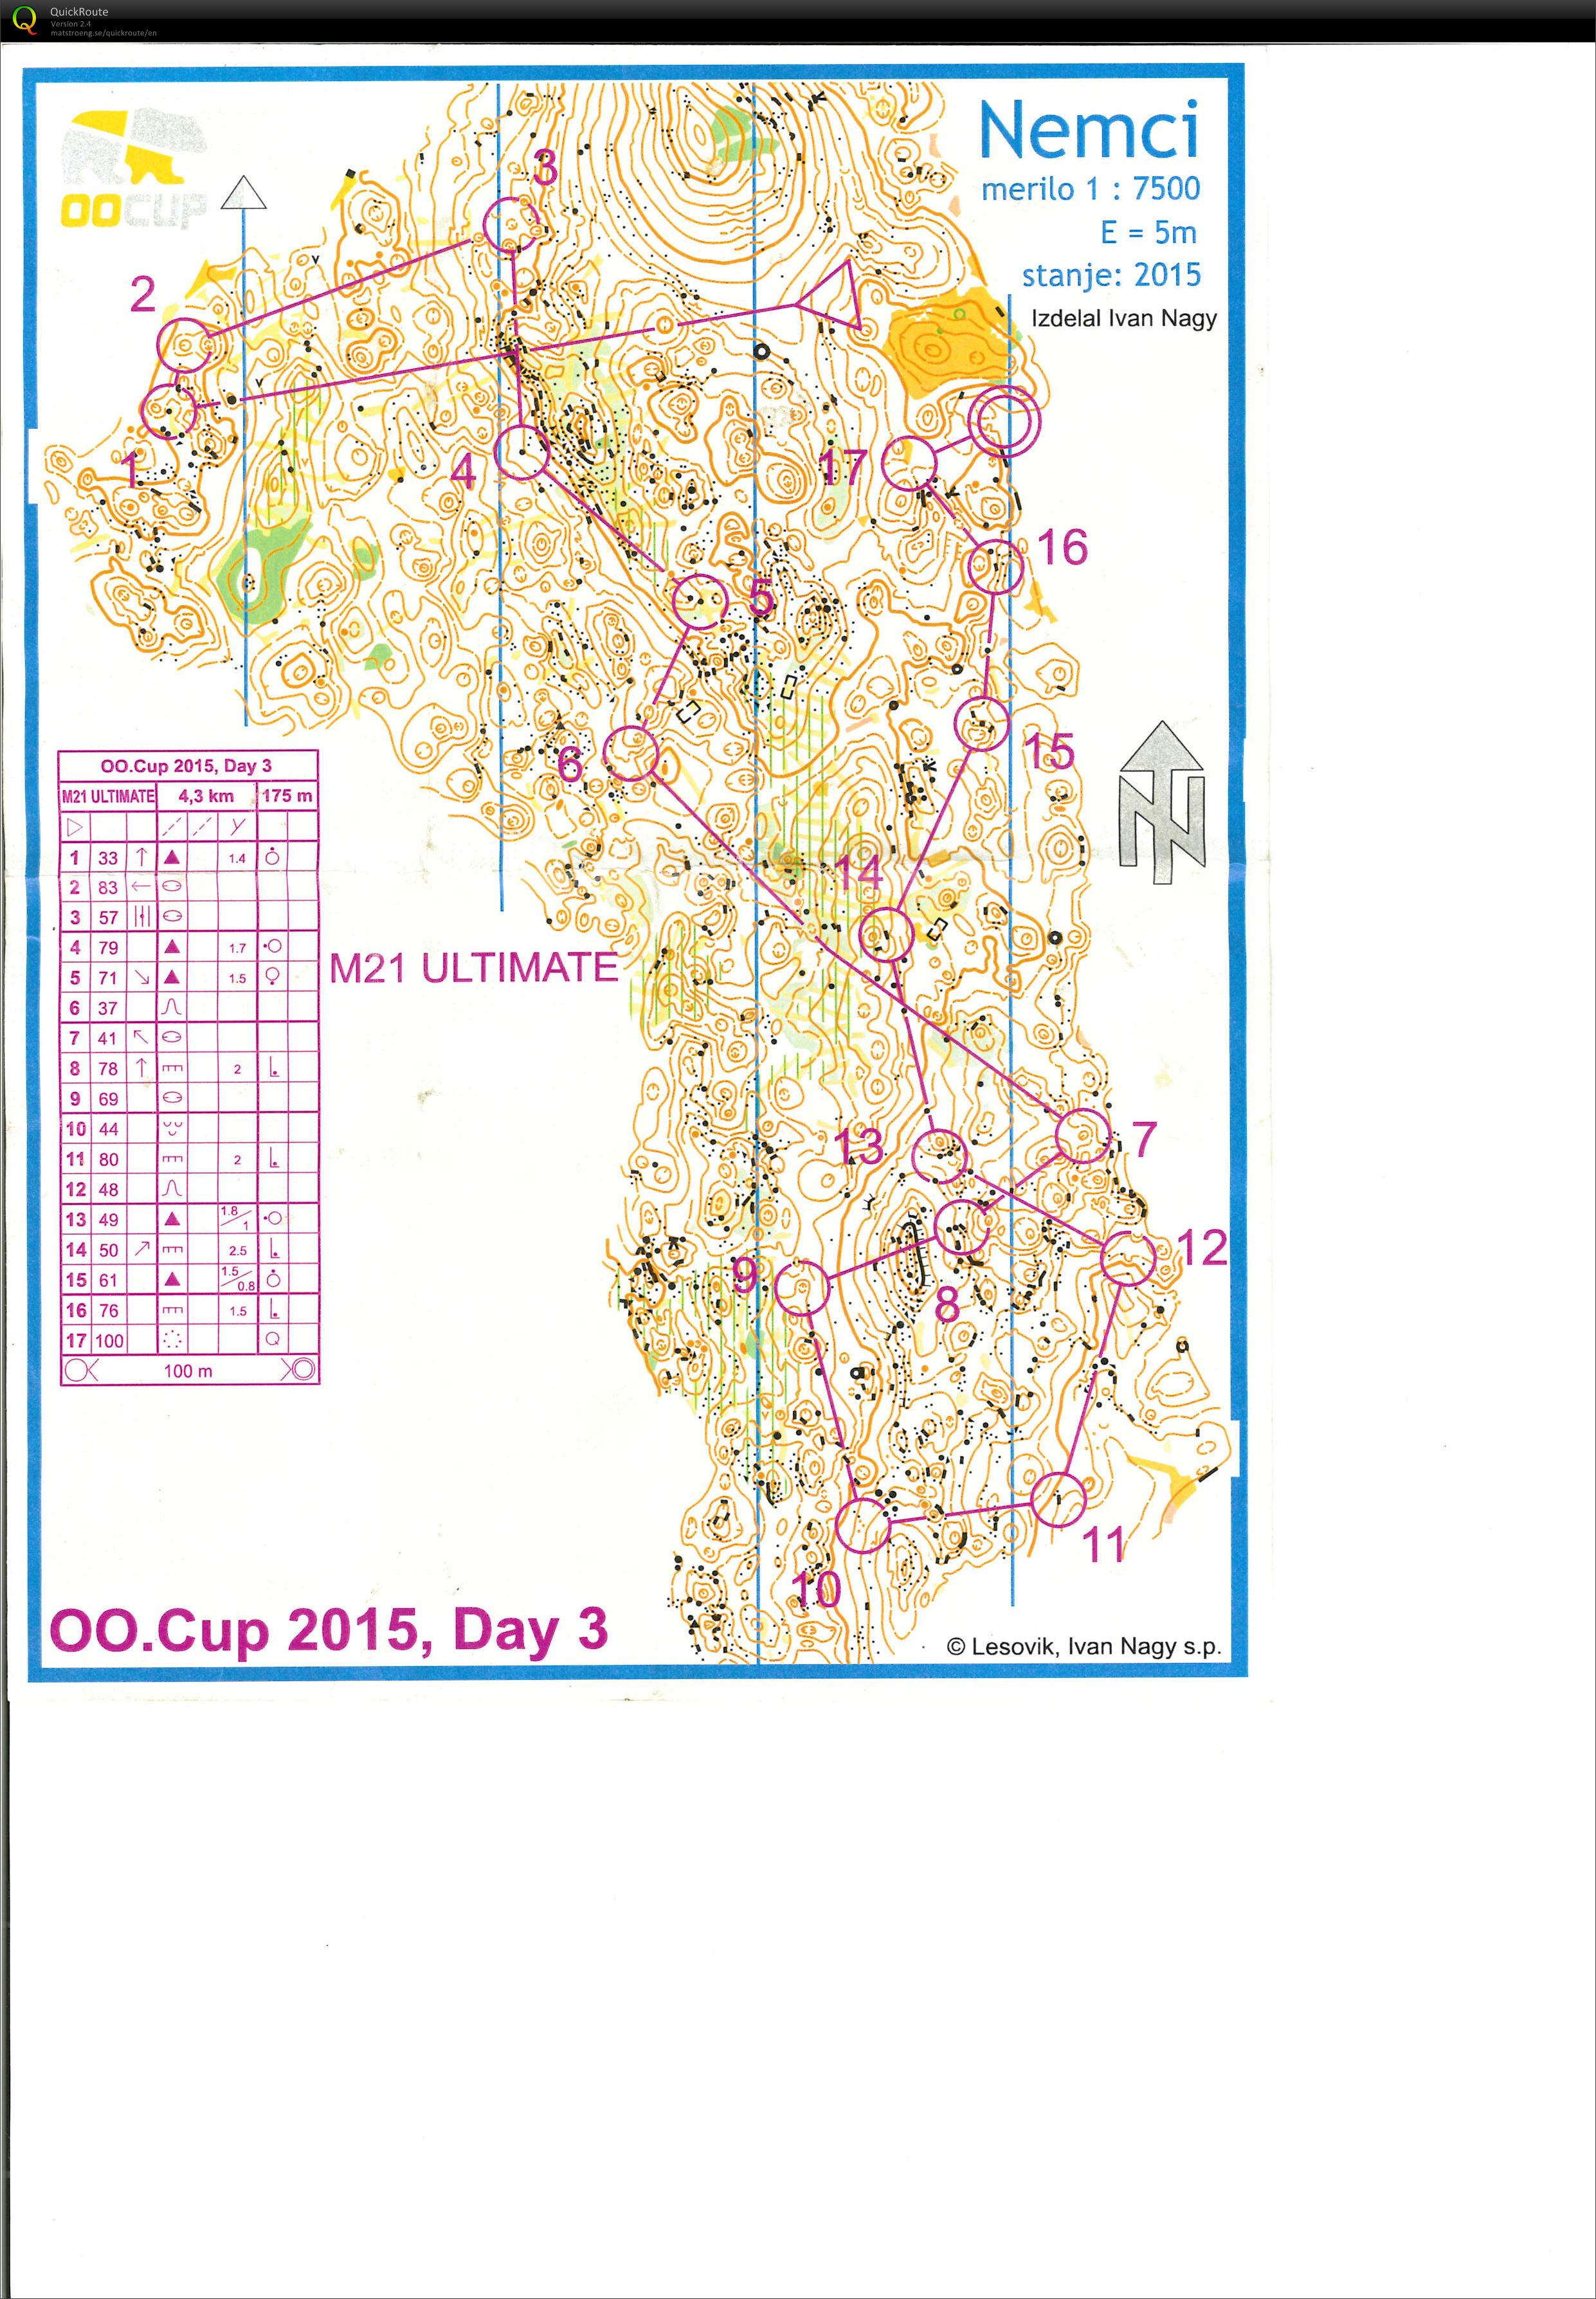 OOCup 2015 Stage 3 (27.07.2015)